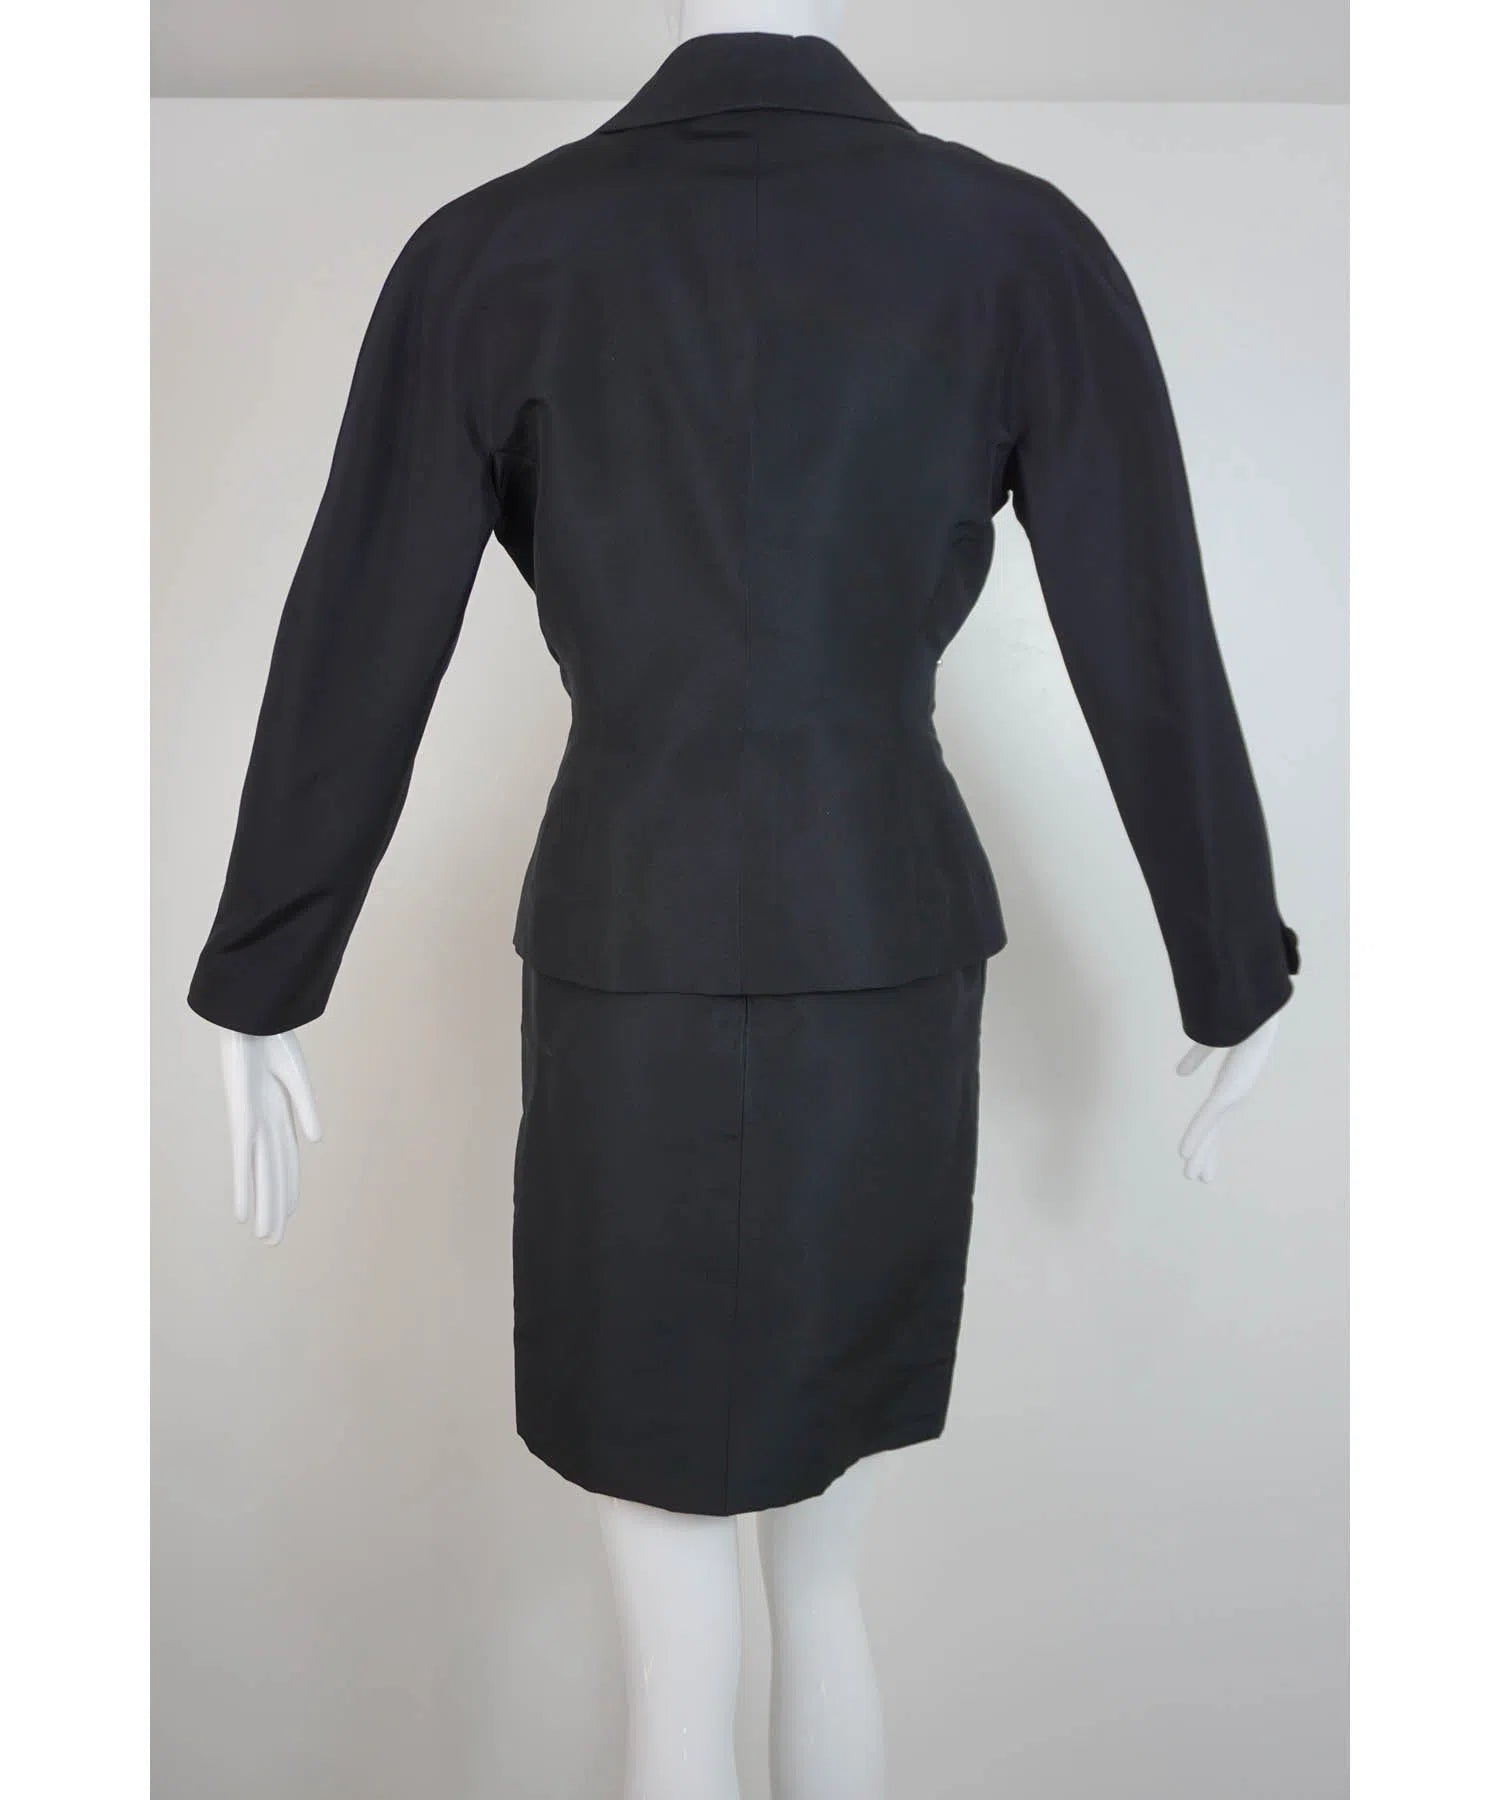 Chanel Pearl Pocket Jacket Suit 1980s - Foxy Couture Carmel